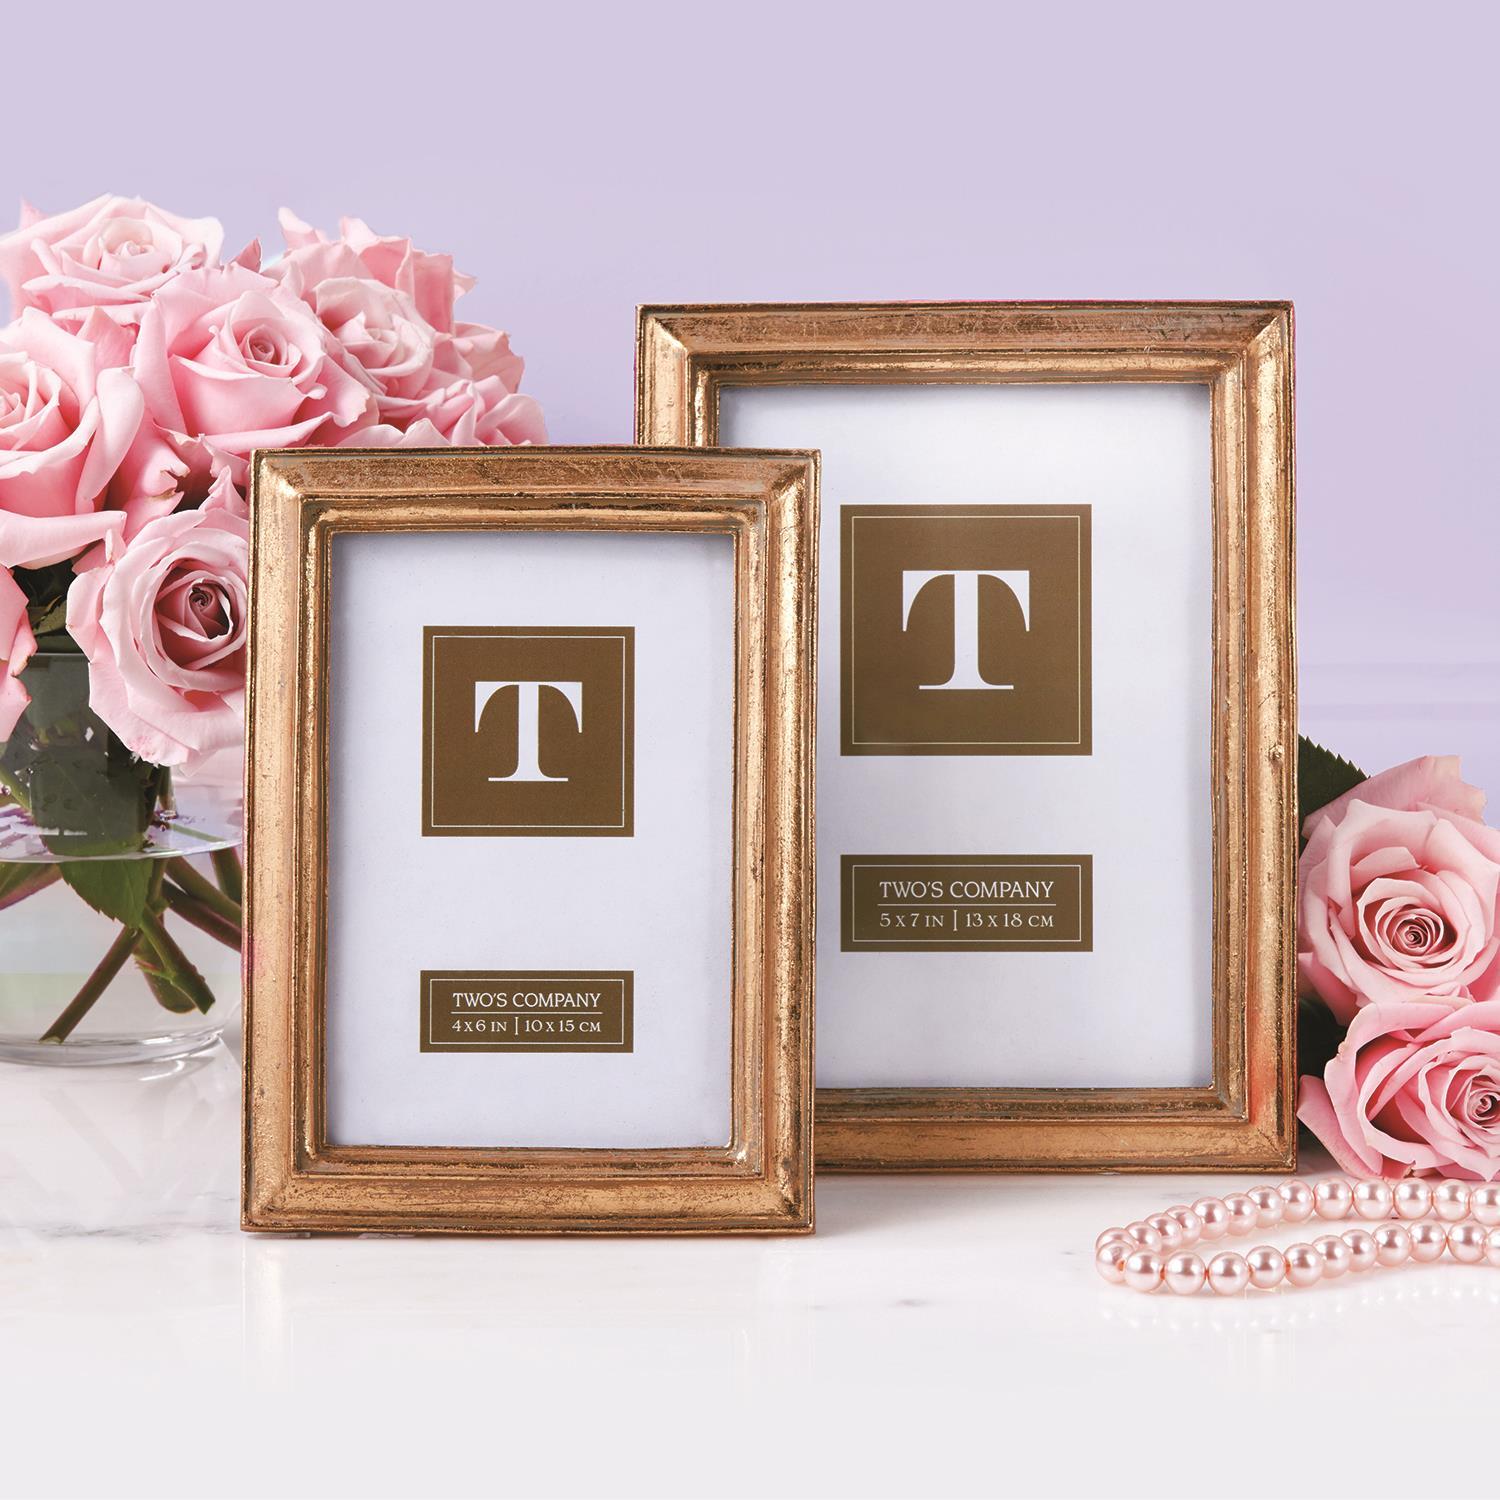 Two's Company Chatelet Gold Leaf Photo Frames (includes 4 x 6 and 5 x 7)